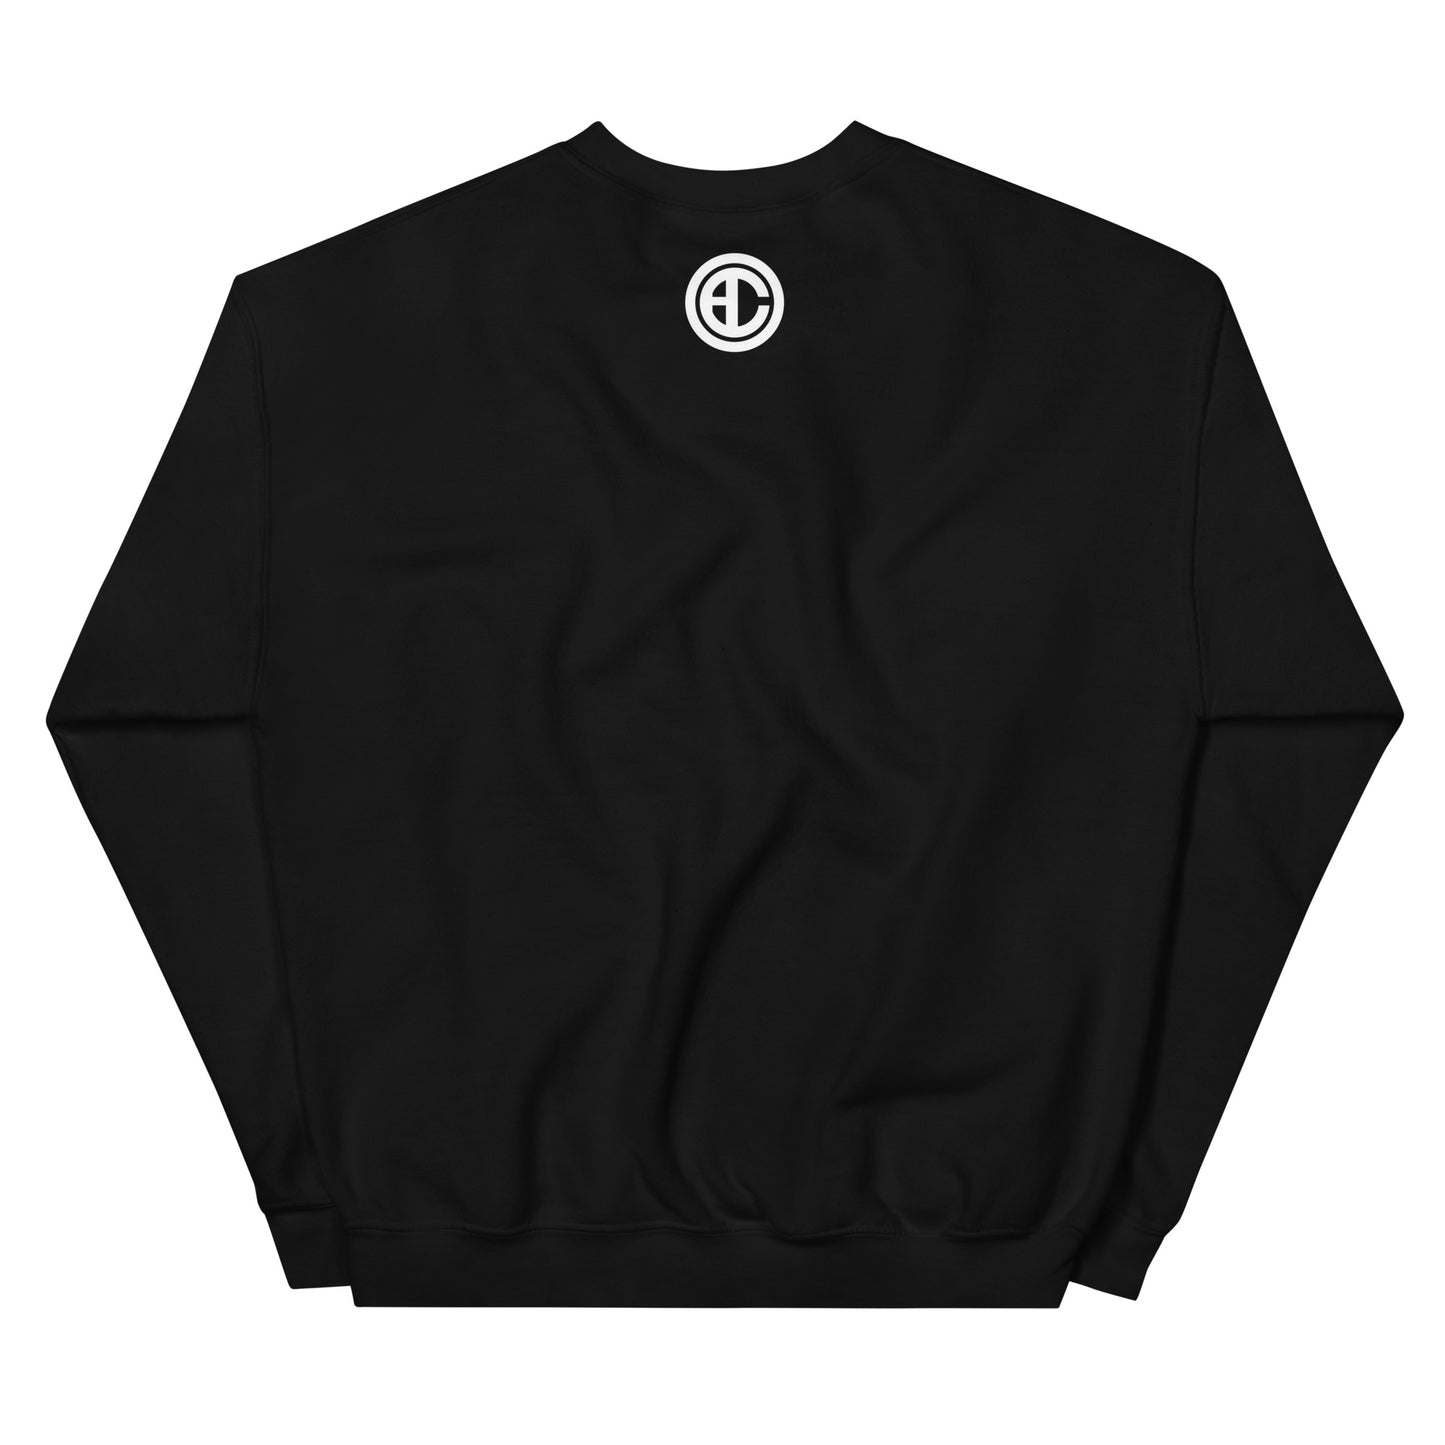 Anointed crewneck